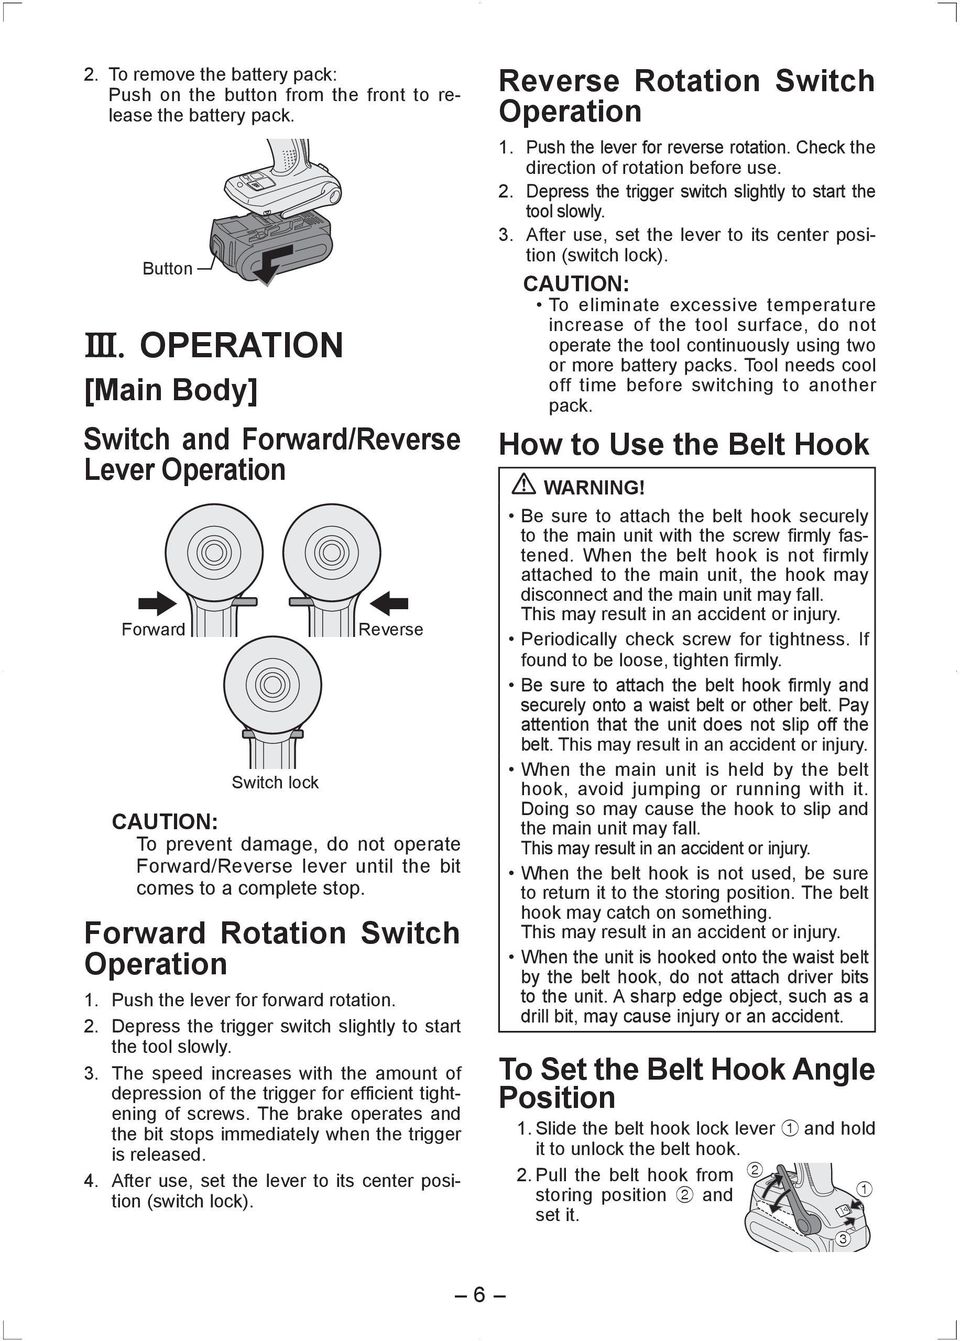 Forward Rotation Switch Operation 1. Push the lever for forward rotation. 2. Depress the trigger switch slightly to start the tool slowly. 3.